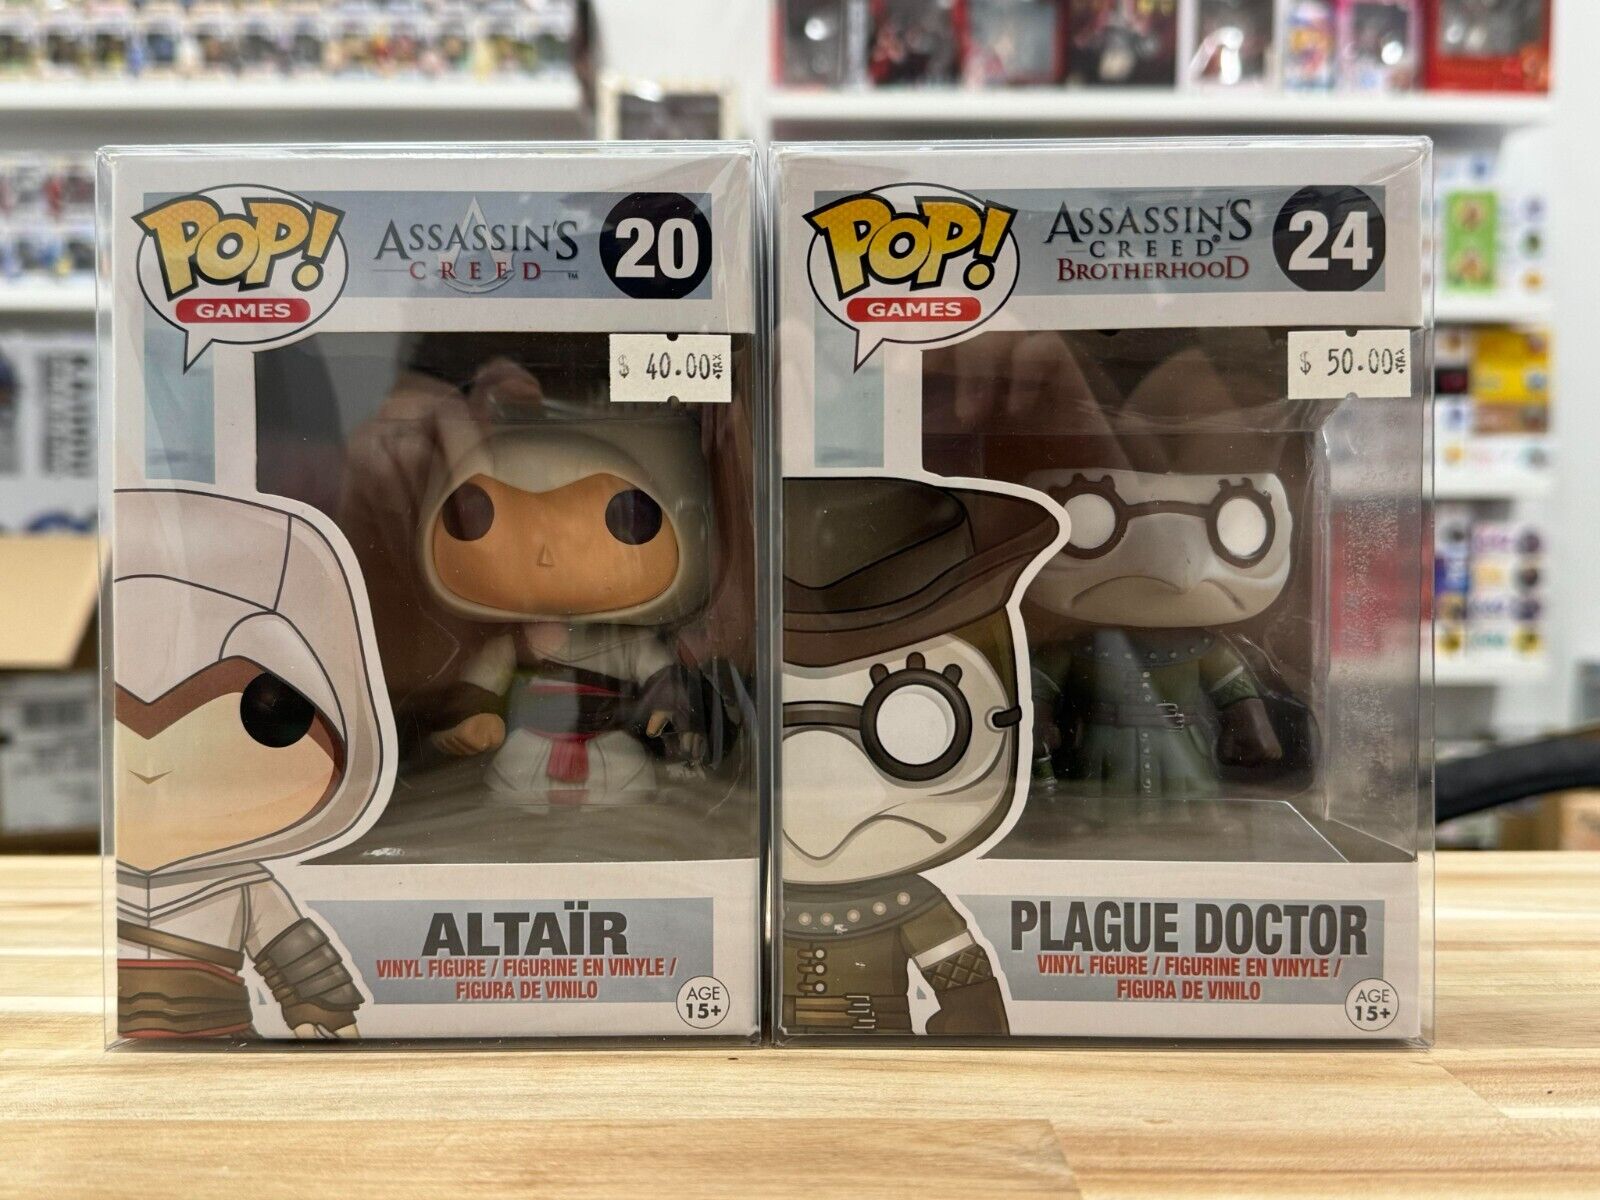 Set of 2 Funko Pop Assassin's Creed - Altair #20 Plague Doctor #24